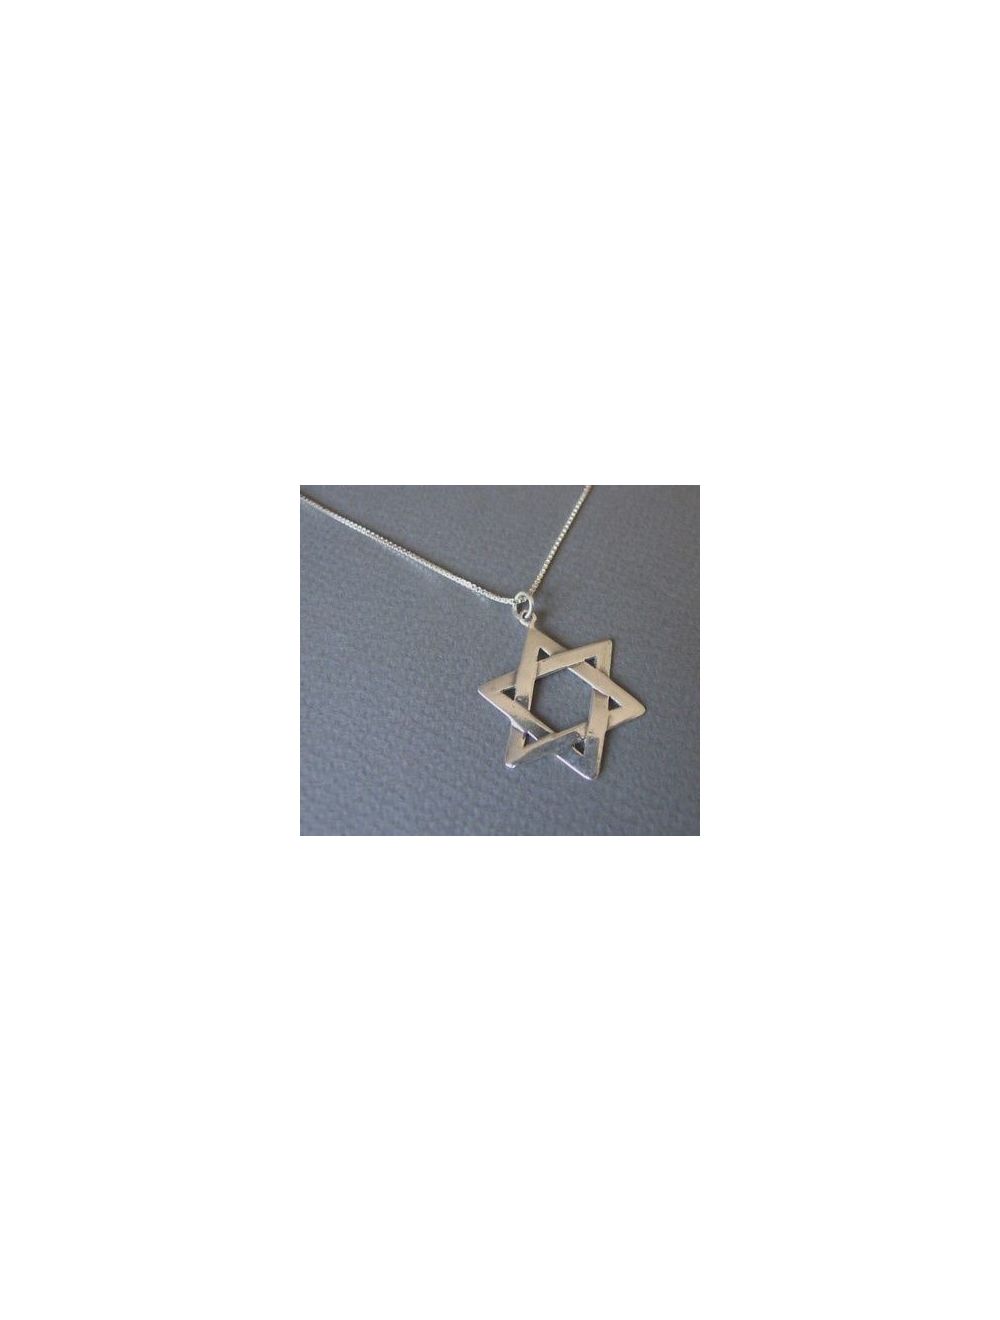 Silver Plated The Star of David Necklace Jewish Judaism 45cm Chain Diamantes UK